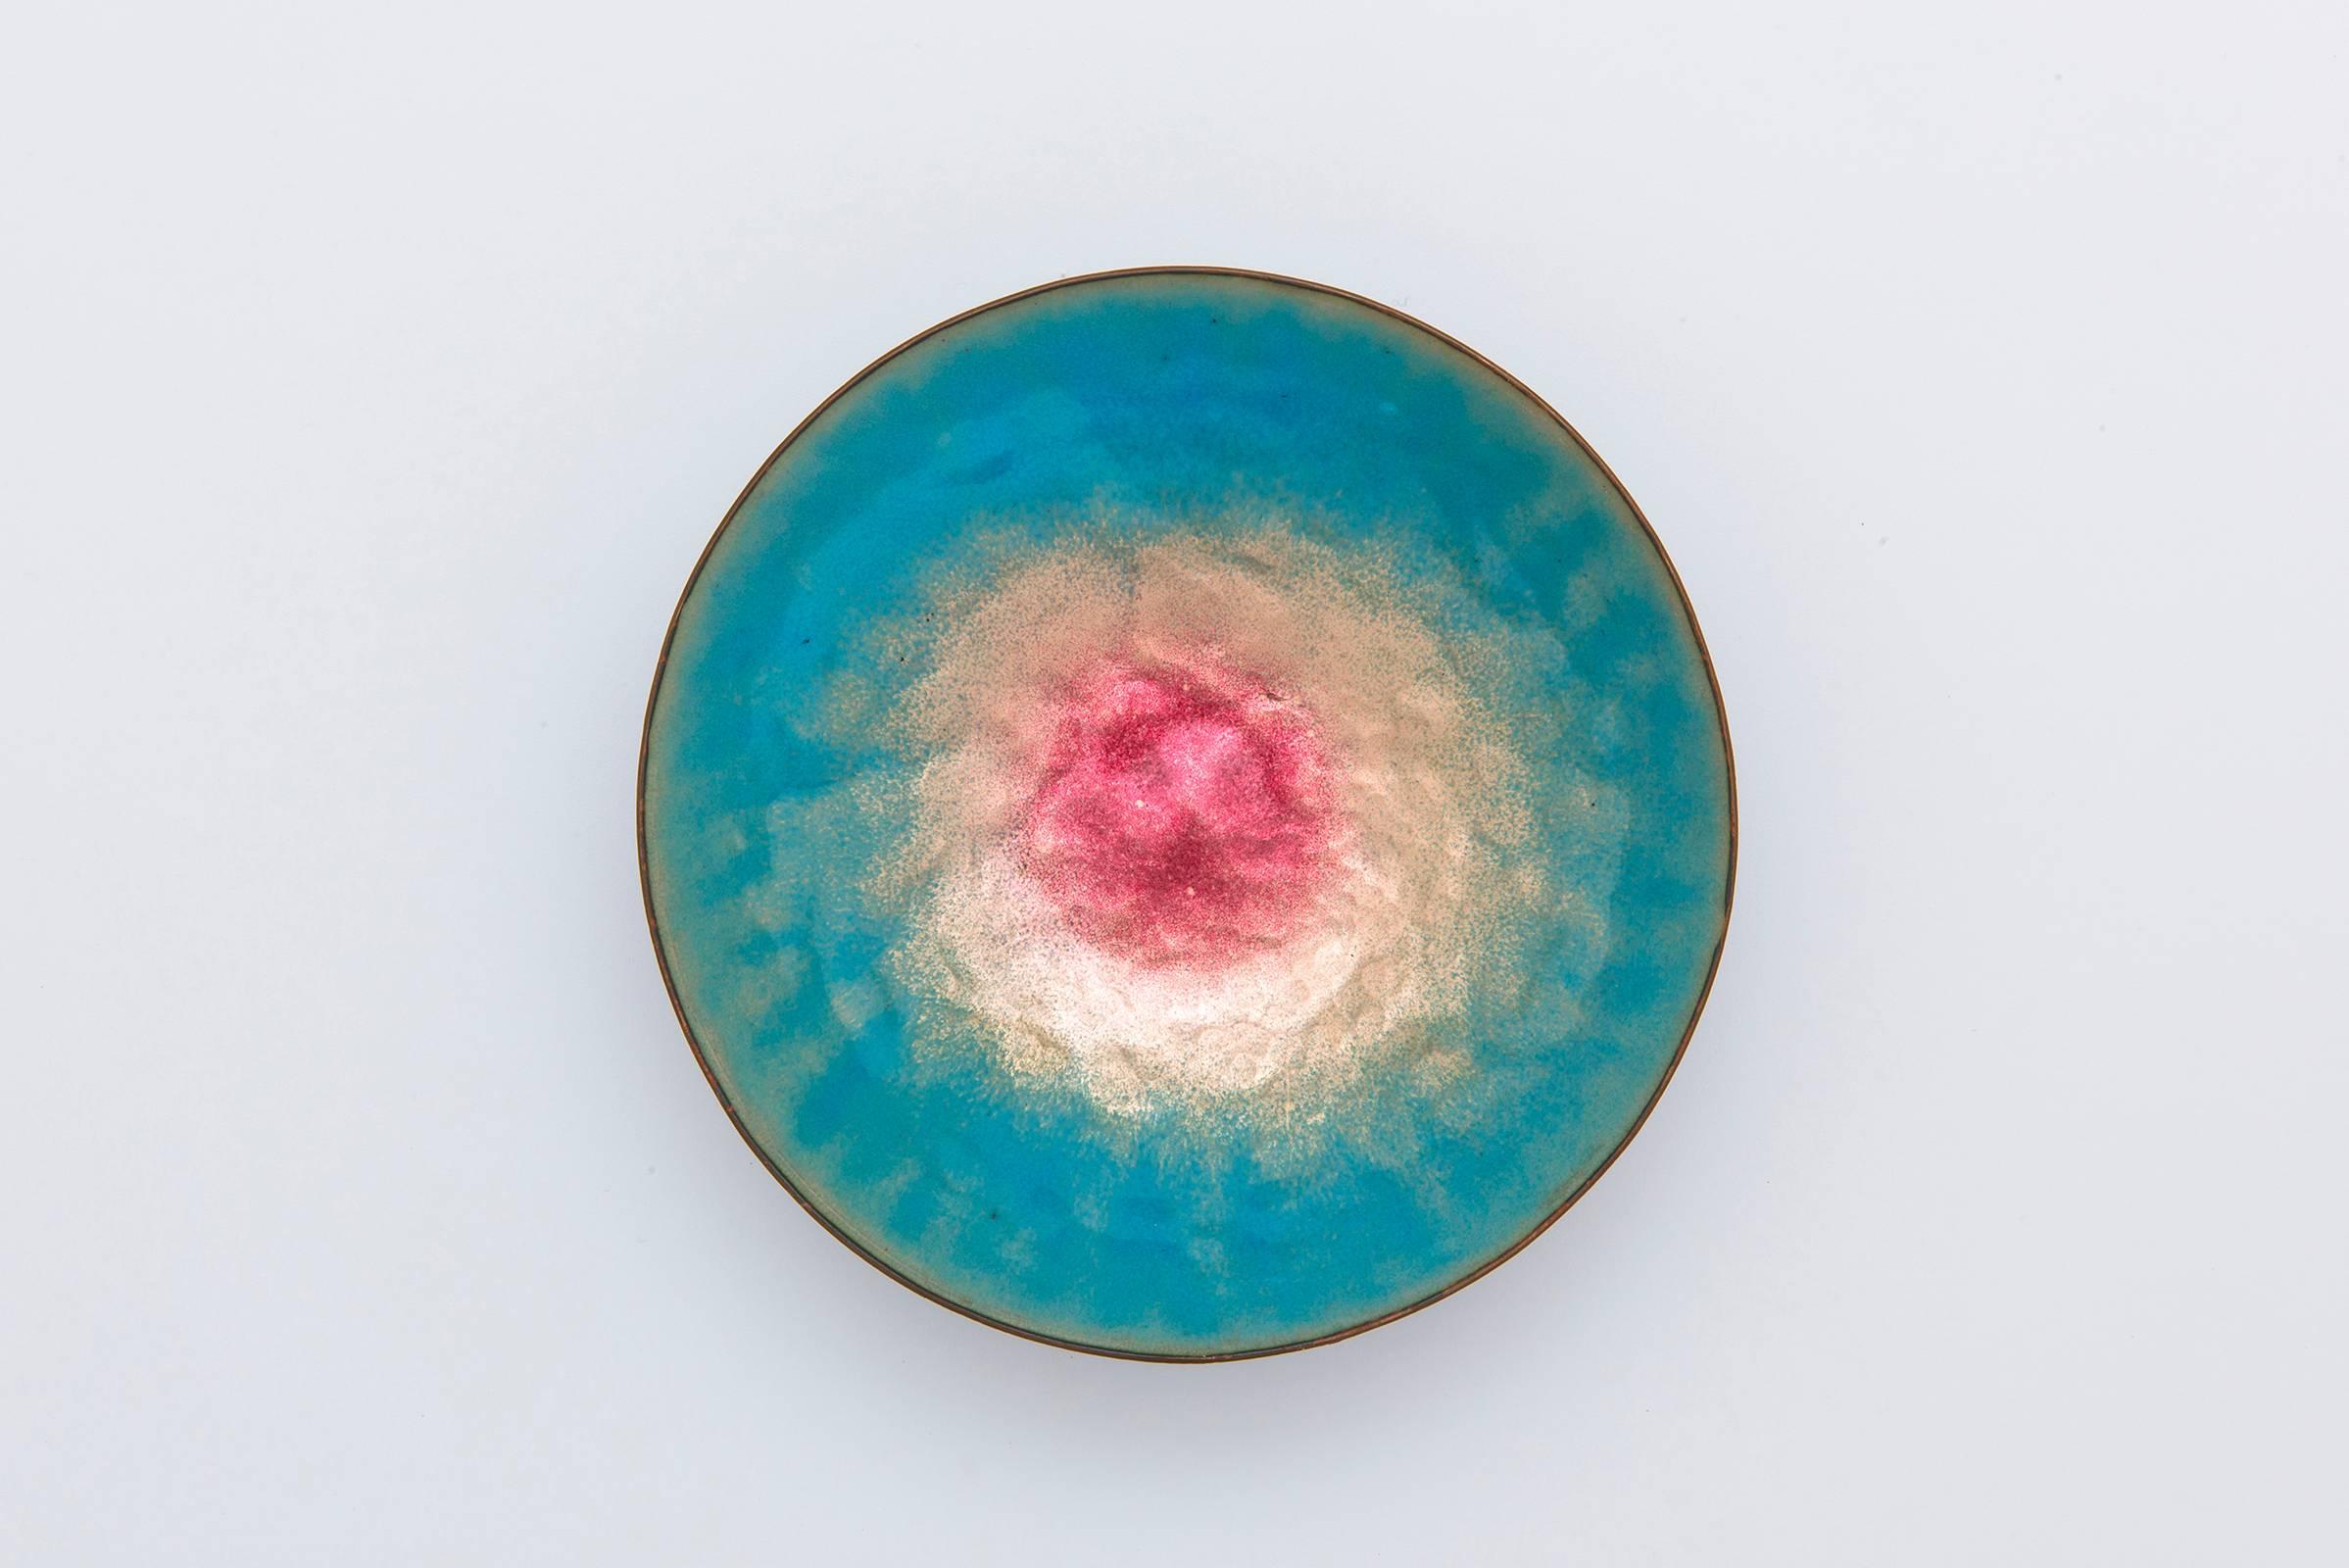 Bowl by Italian master of enamel Paolo De Poli. Excellent coloring ranges from pink to gold to turquoise. Outside of bowl is a royal blue. Signed to underside.